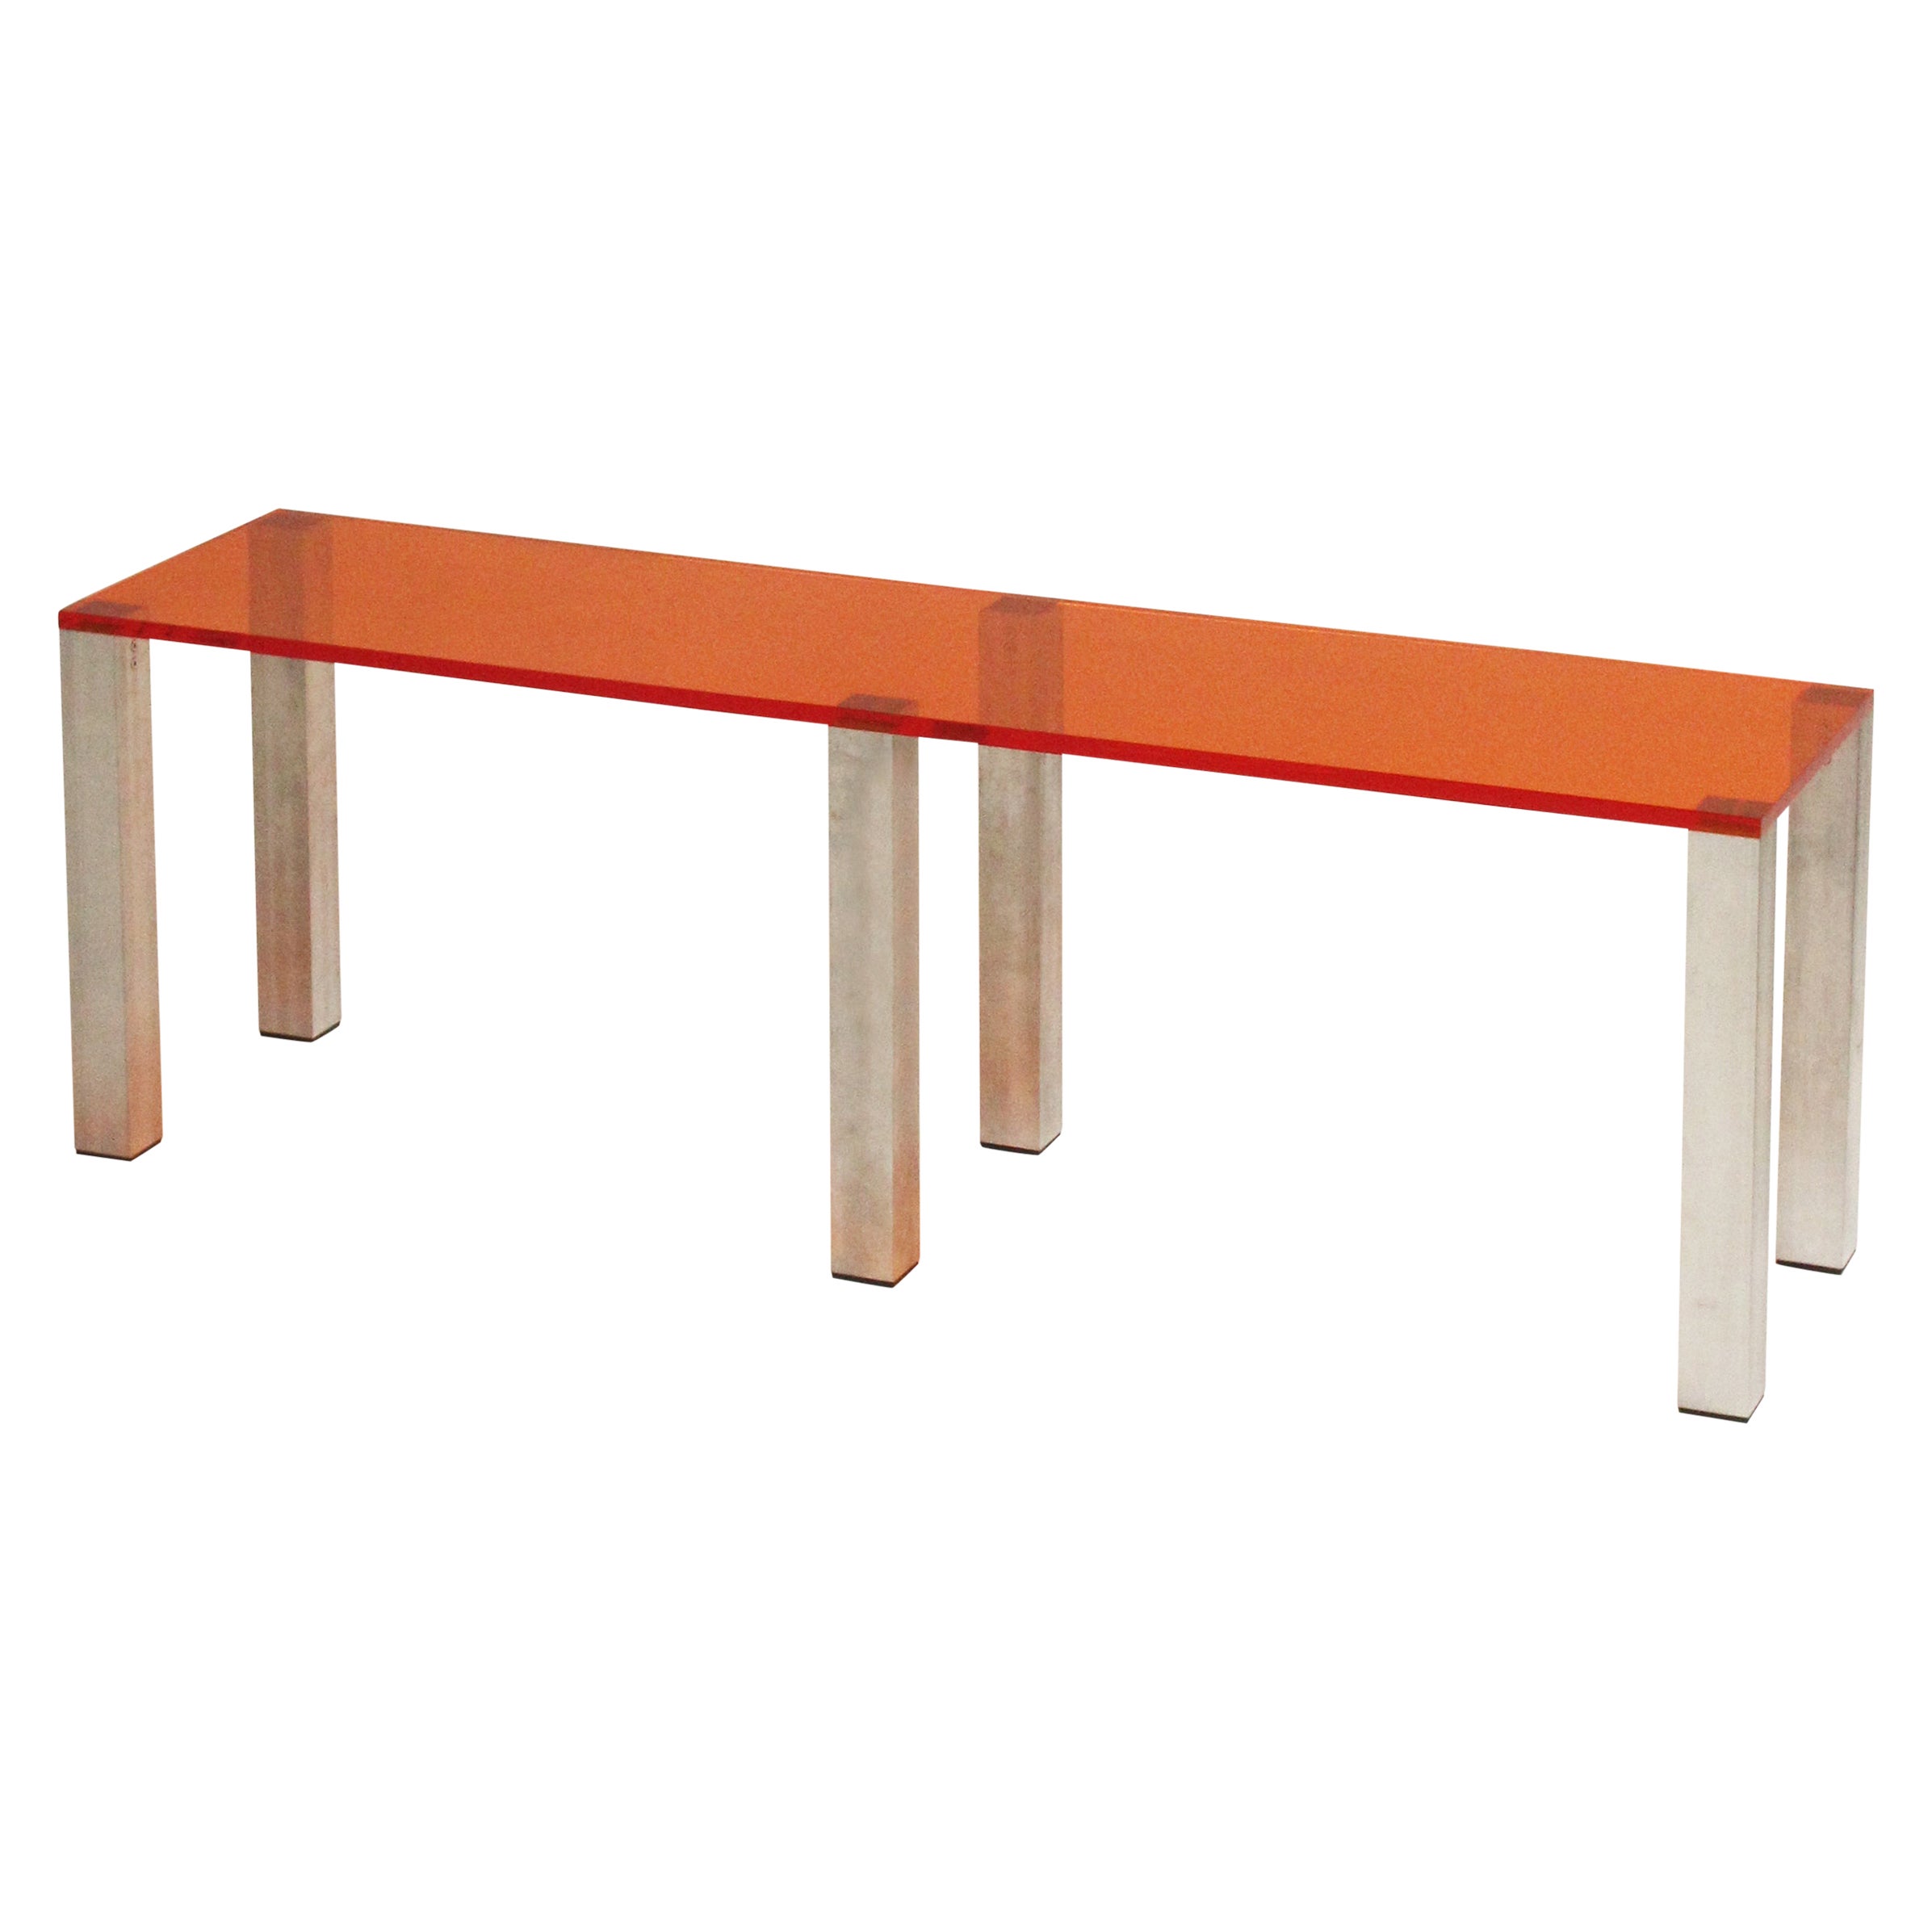 Acrilar Bench For Sale